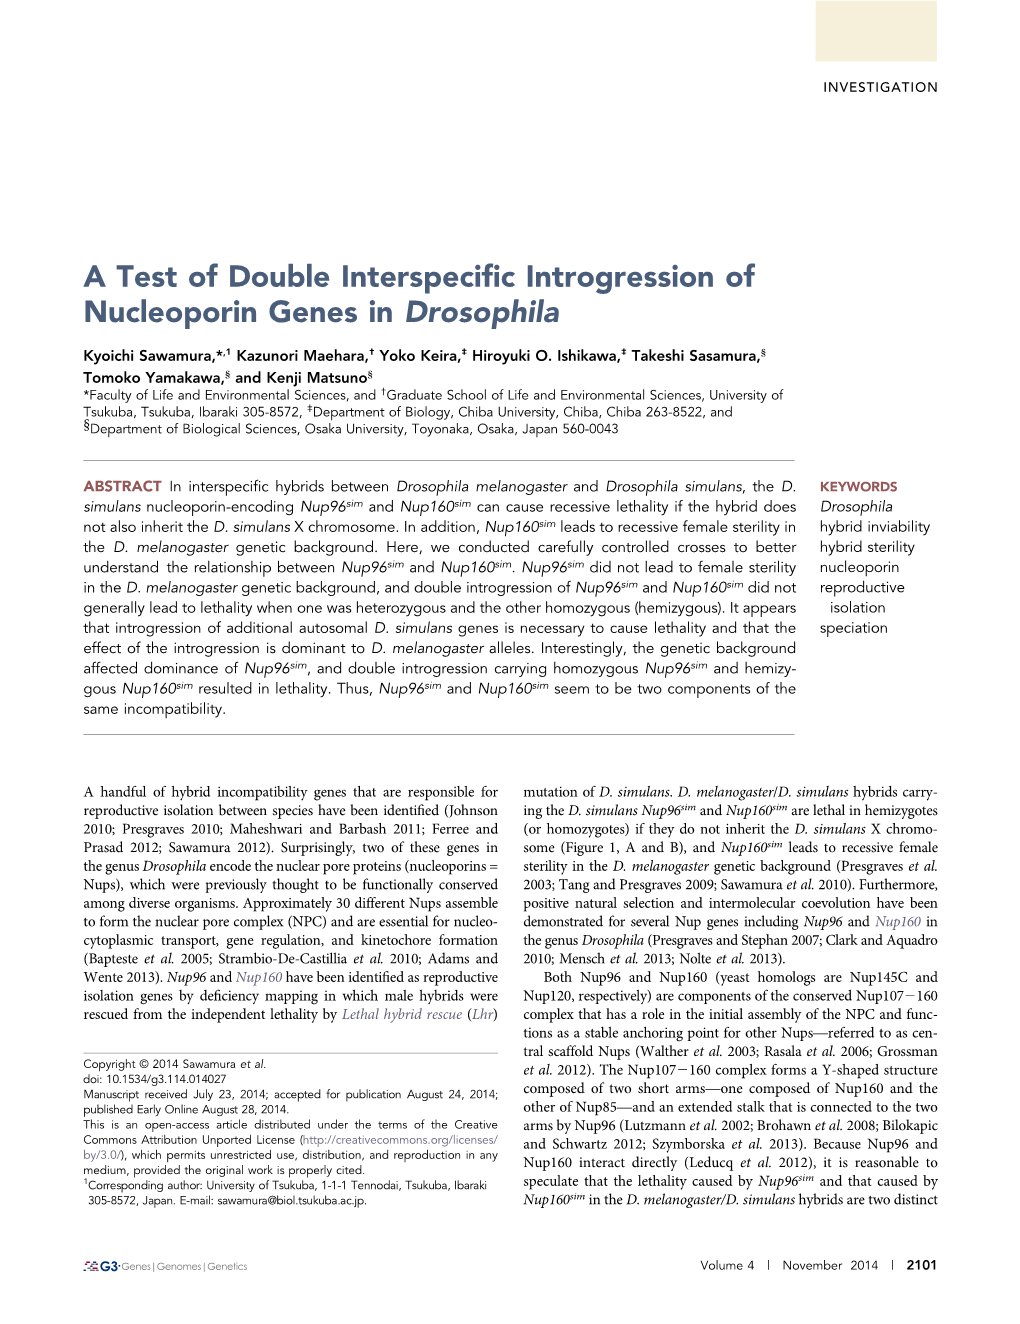 A Test of Double Interspecific Introgression of Nucleoporin Genes